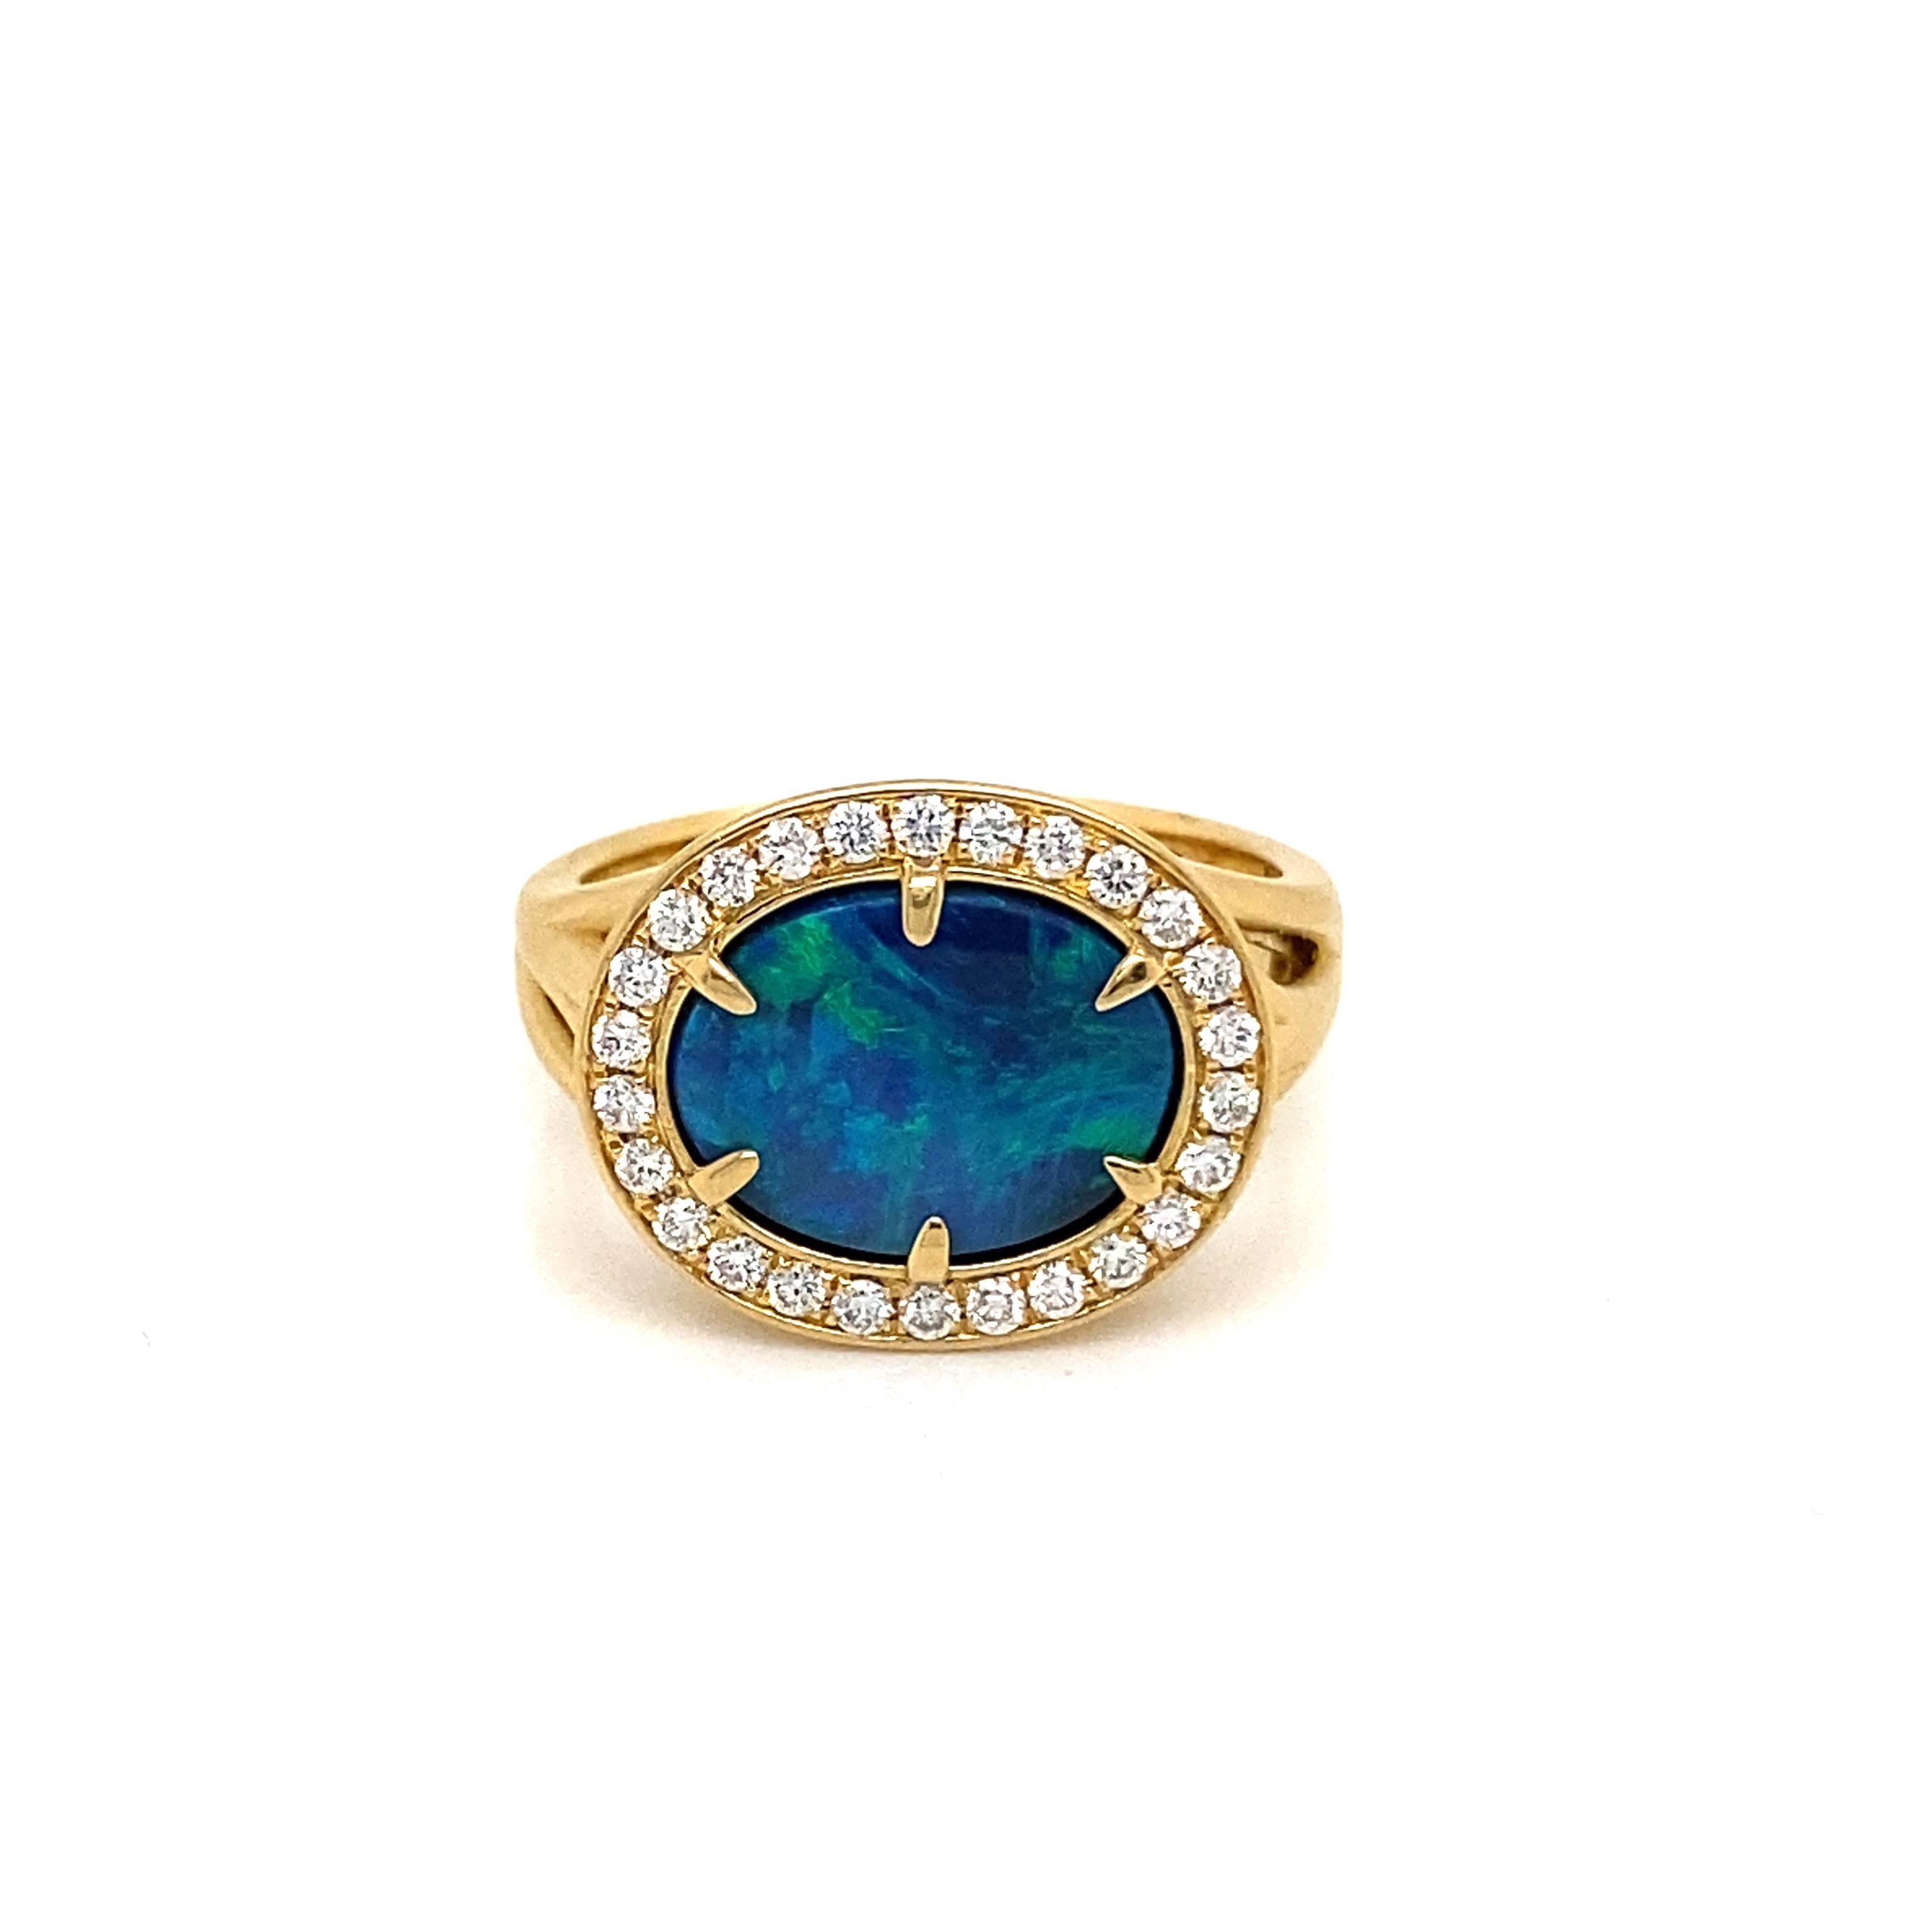 This stunning cocktail ring showcases a beautiful 1.53 Carat Lightning Ridge Oval Black Opal with a Diamond Halo on a Diamond Shank. This ring is set in 18k Yellow Gold, with 18k yellow gold prongs on the center stone.
Total Diamond Weight = 0.12